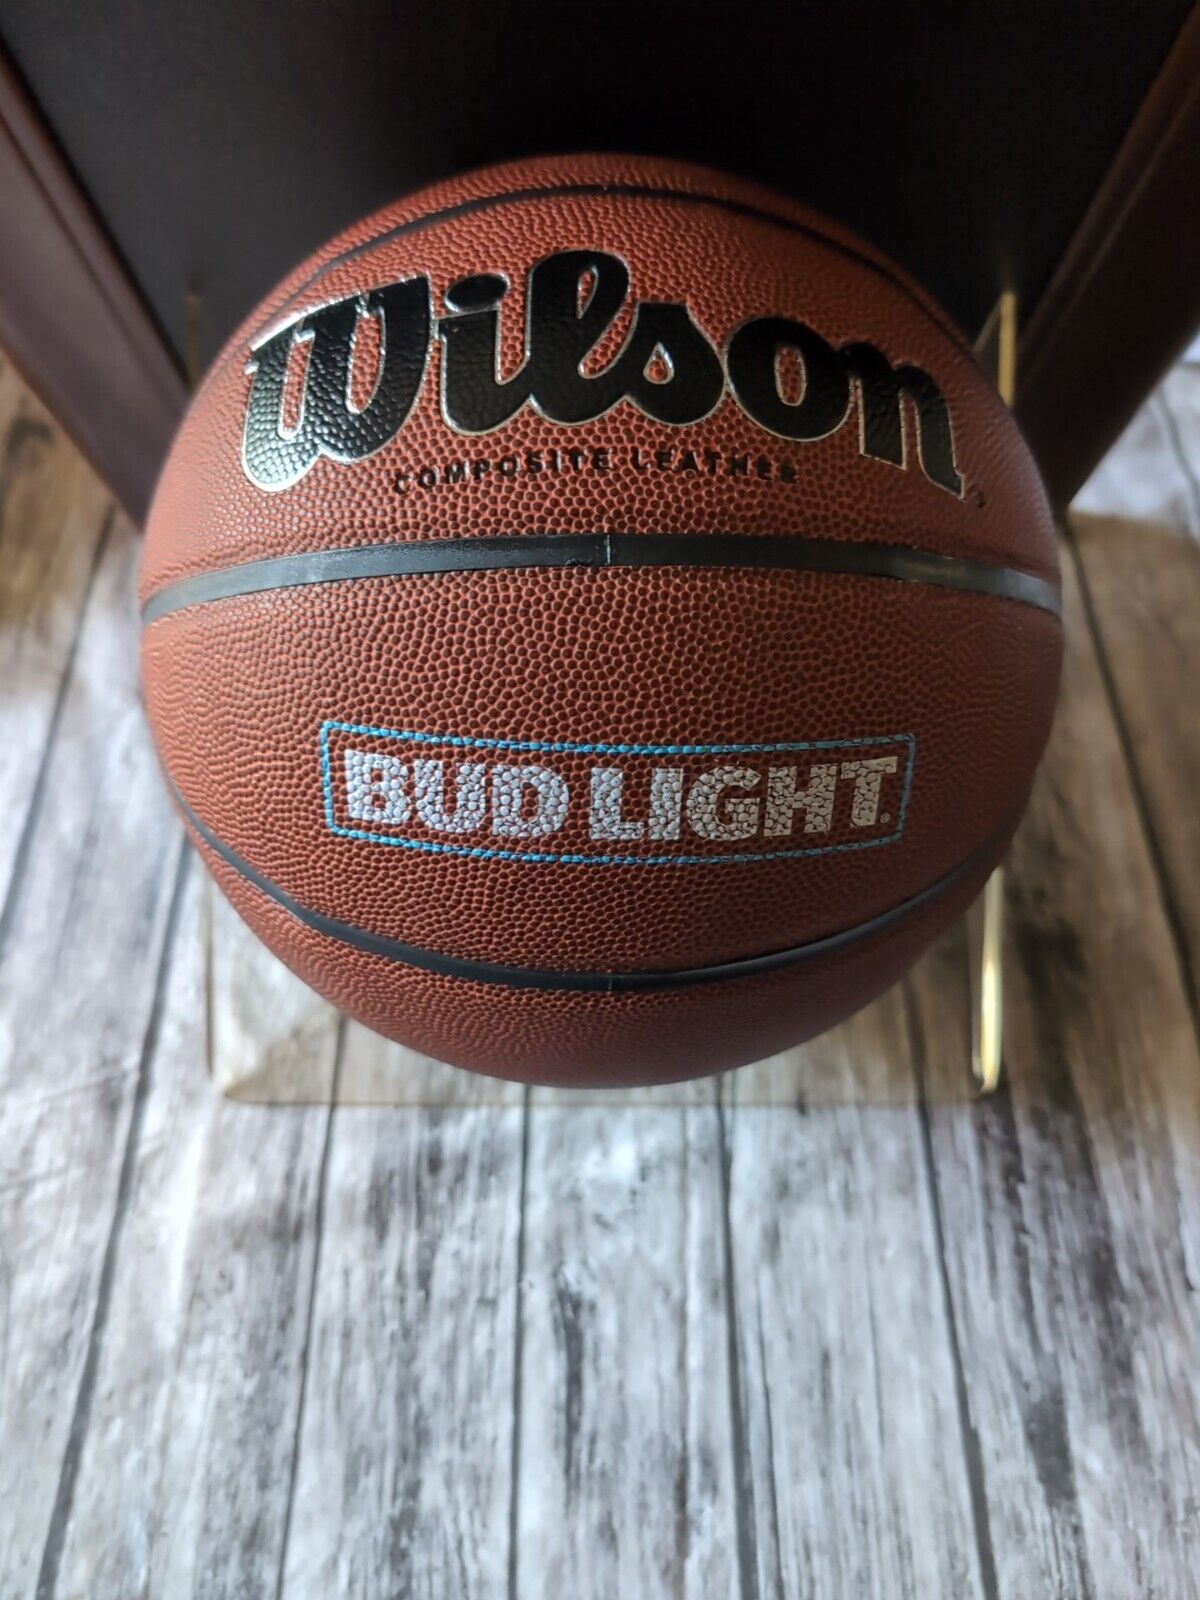 ONE OF A KIND-1/1-BUD LIGHT X WILSON BASKETBALL-NEW-SEALED-FAST SHIPPING